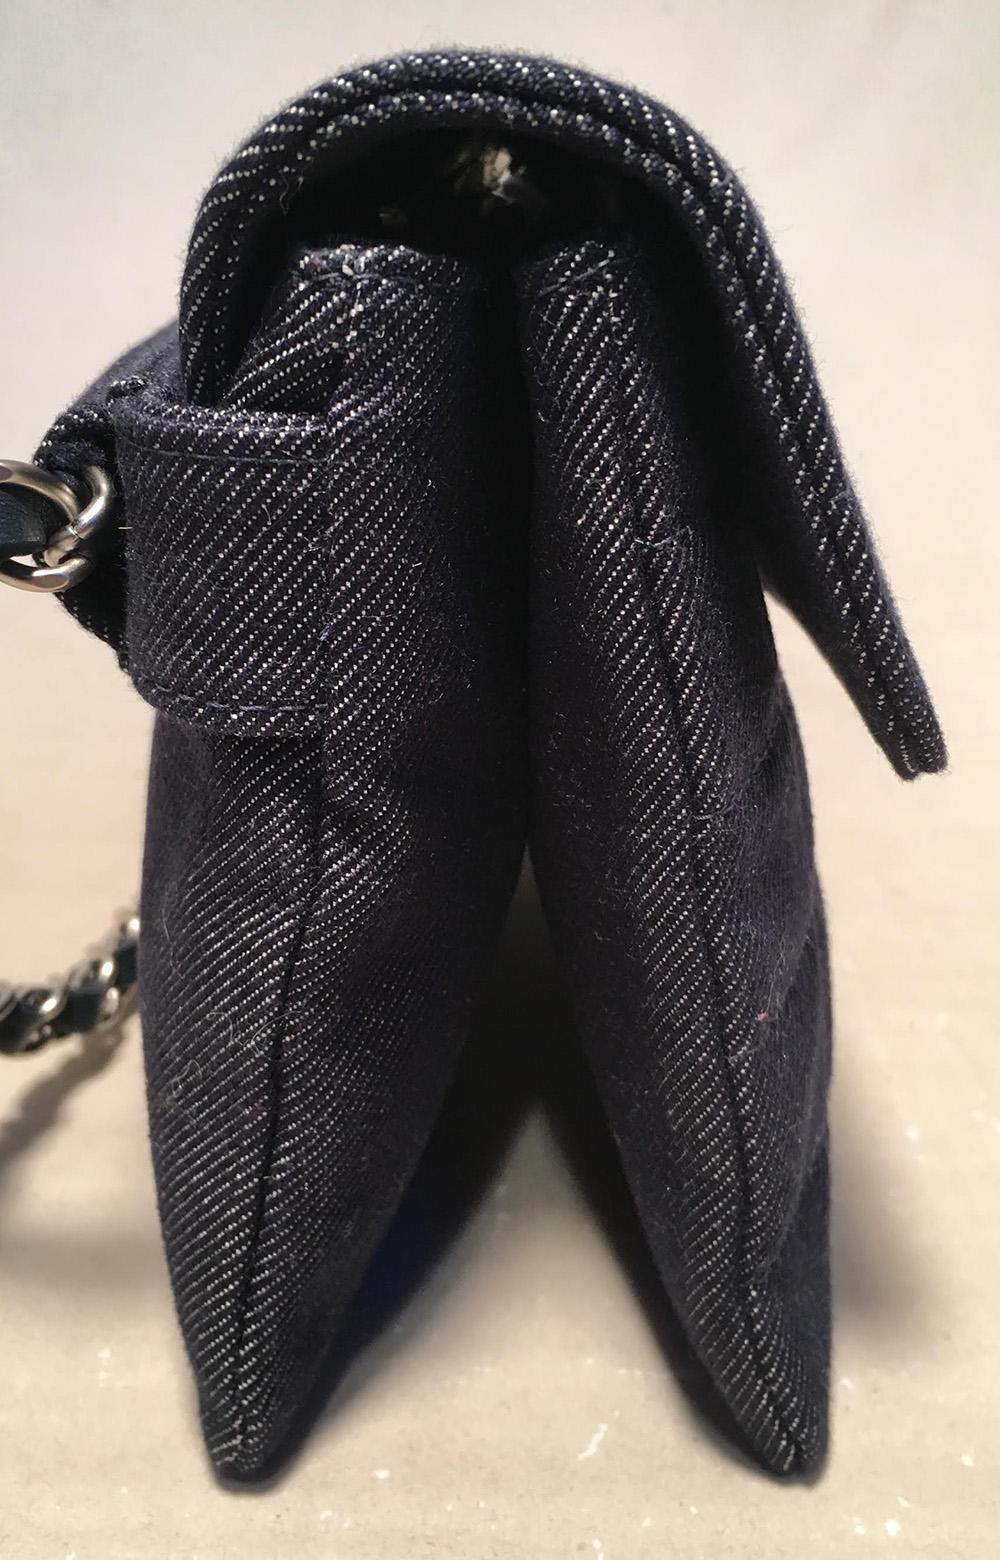 Chanel Square Quilted Denim Convertible Bum Bag Waist Pouch Clutch Shoulder Bag in excellent condition. Square quilted denim exterior trimmed with matte silver hardware. Woven chain and leather chain strap that can be worn around the waist, hips,